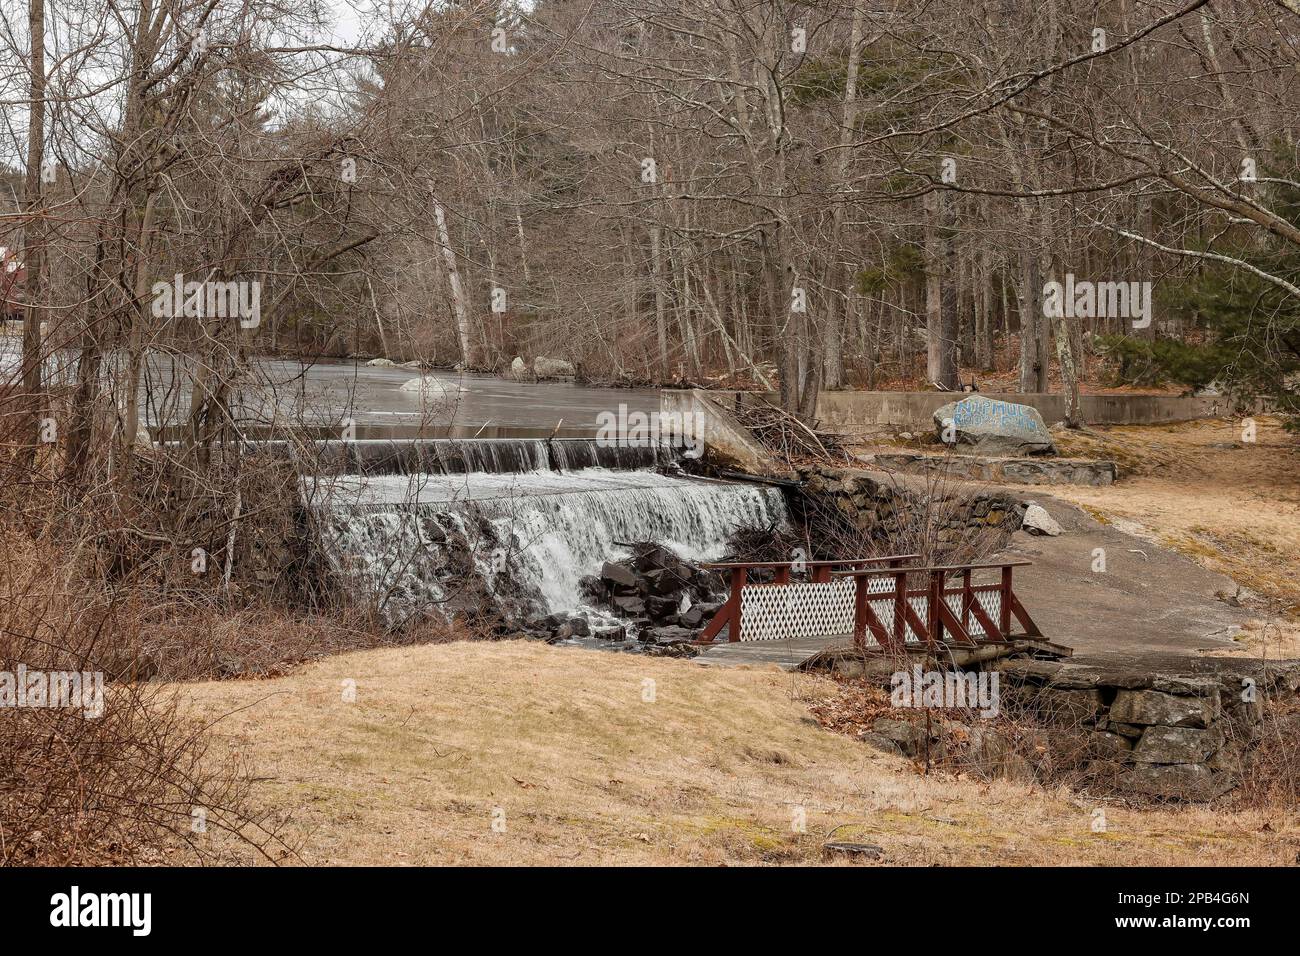 Mostly a gun club and recreation Club in Boston suburbs. This small dam in Upton  is visible from the road. Small wildlife here in Worcester, Mass sub Stock Photo